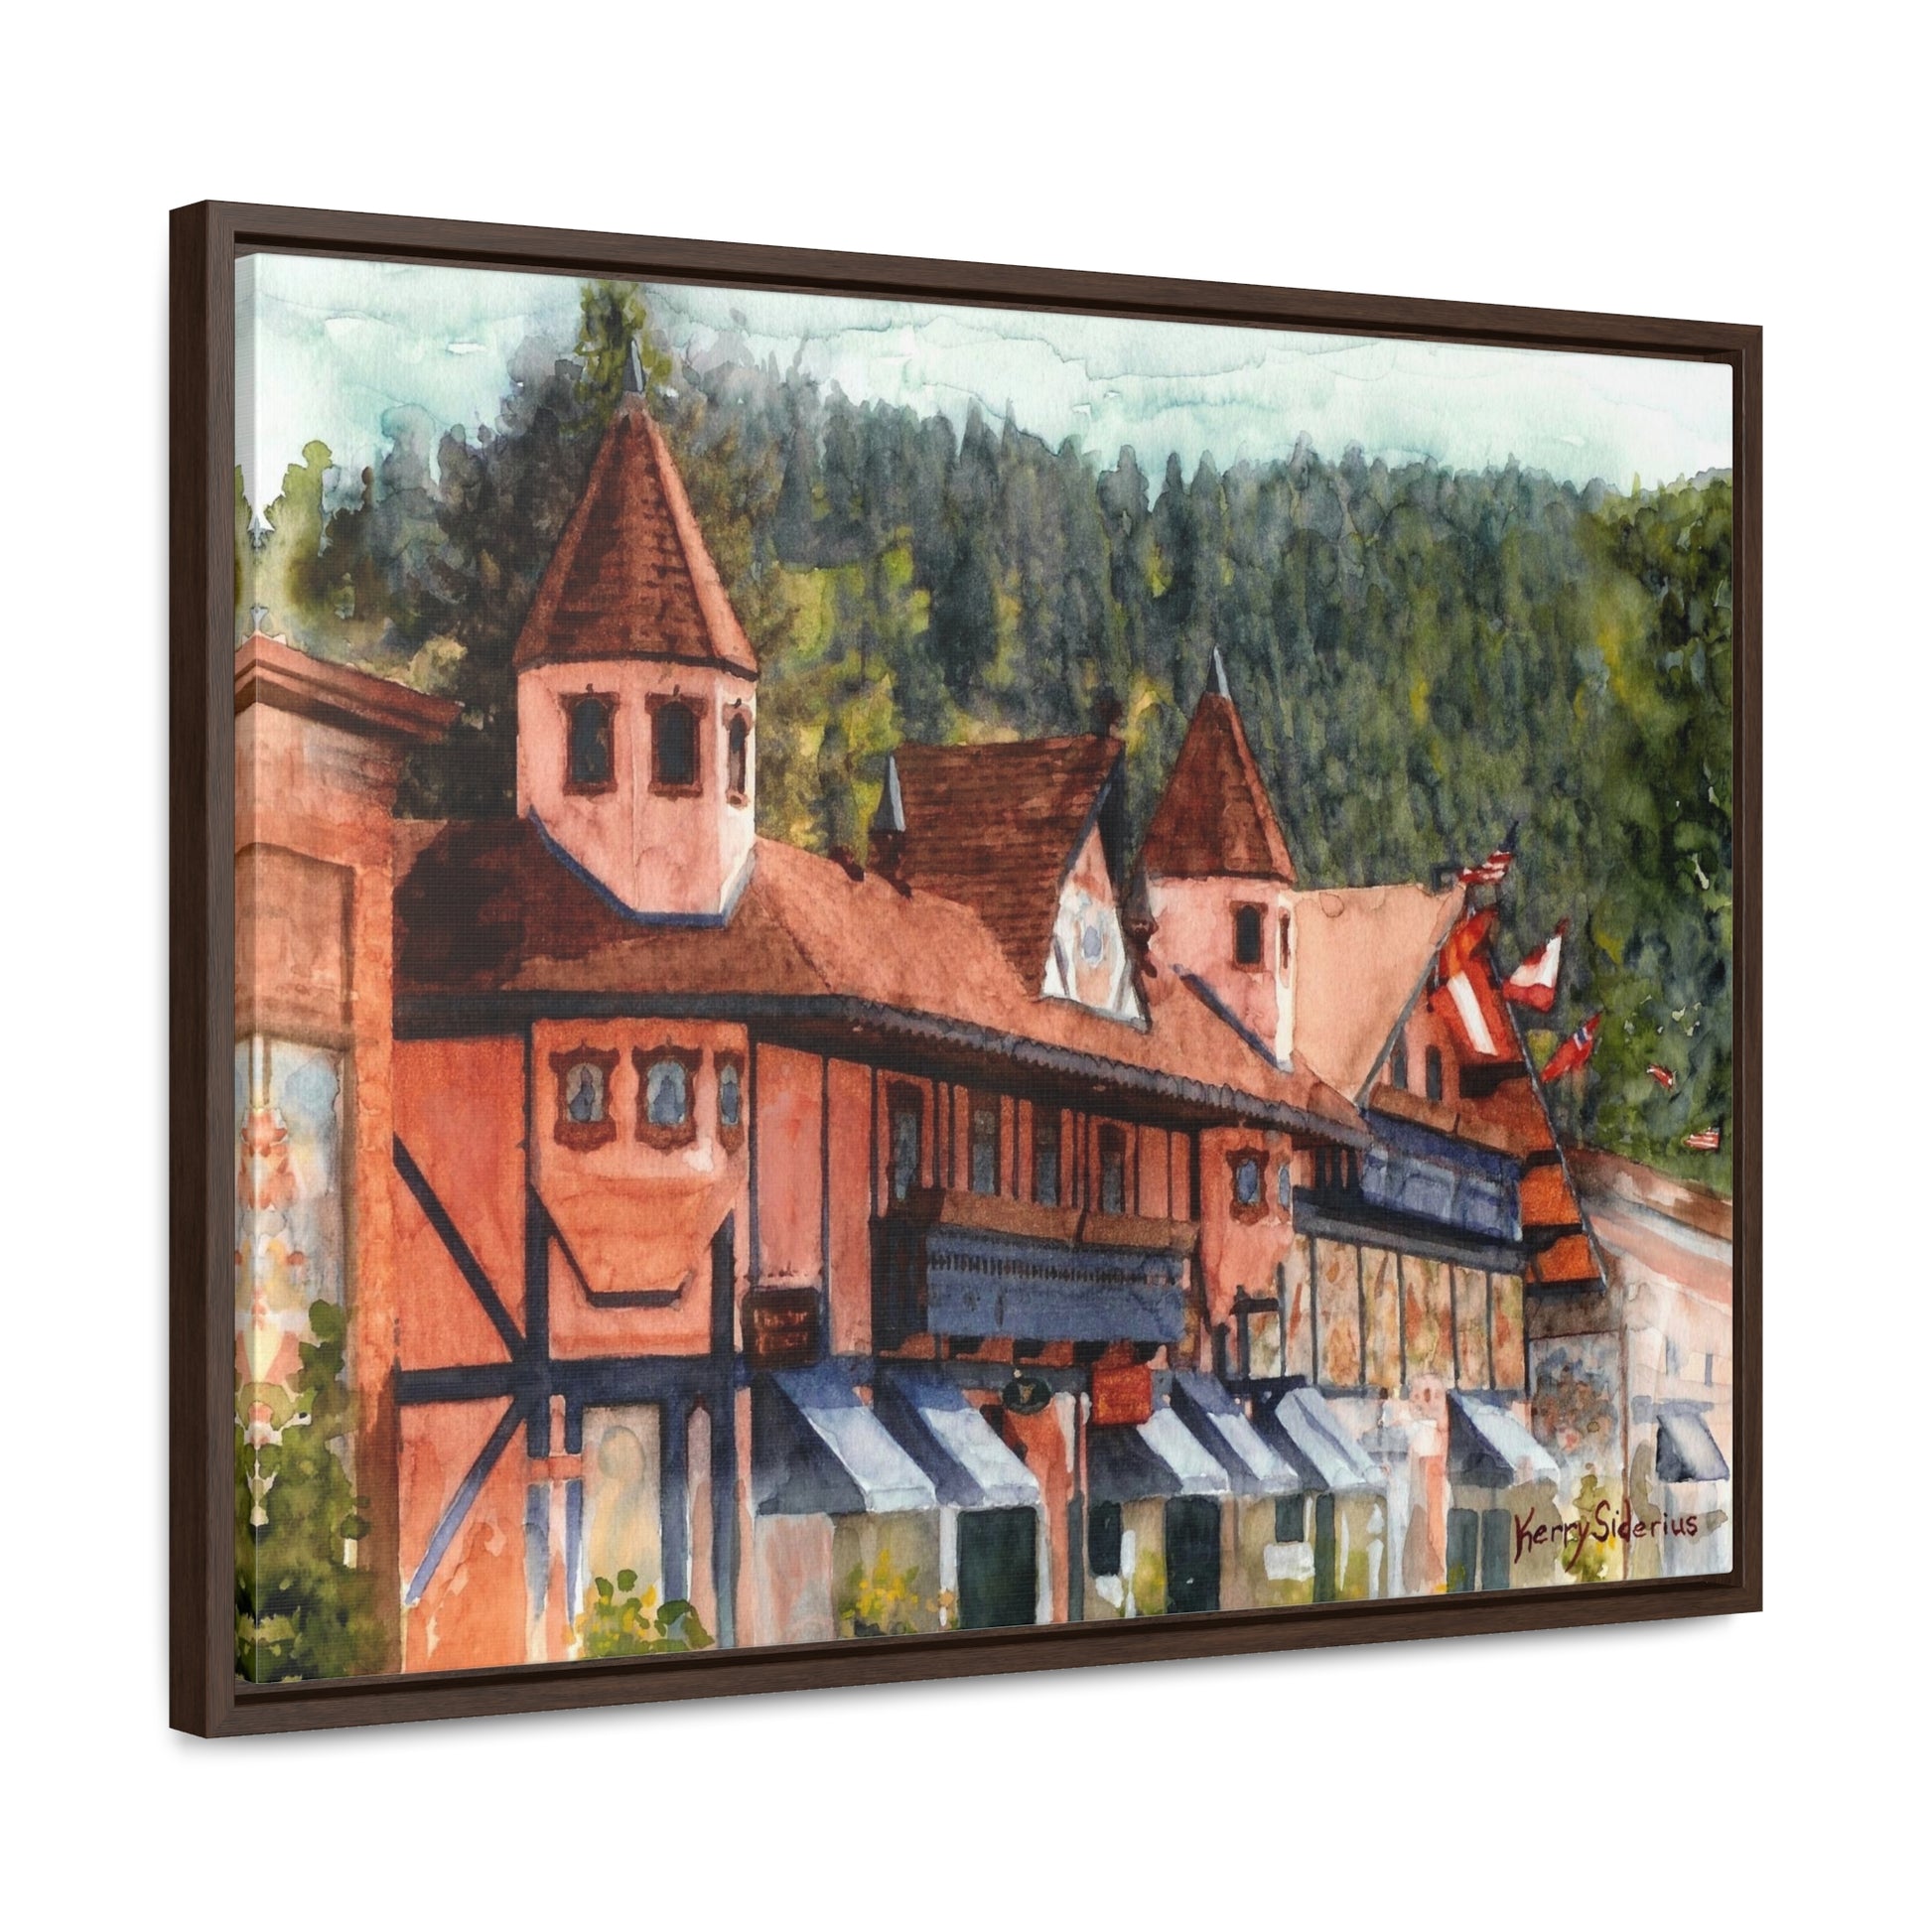 "Leavenworth Street" Gallery Wrapped Canvas, Wood Framed - Kerry Siderius Art 